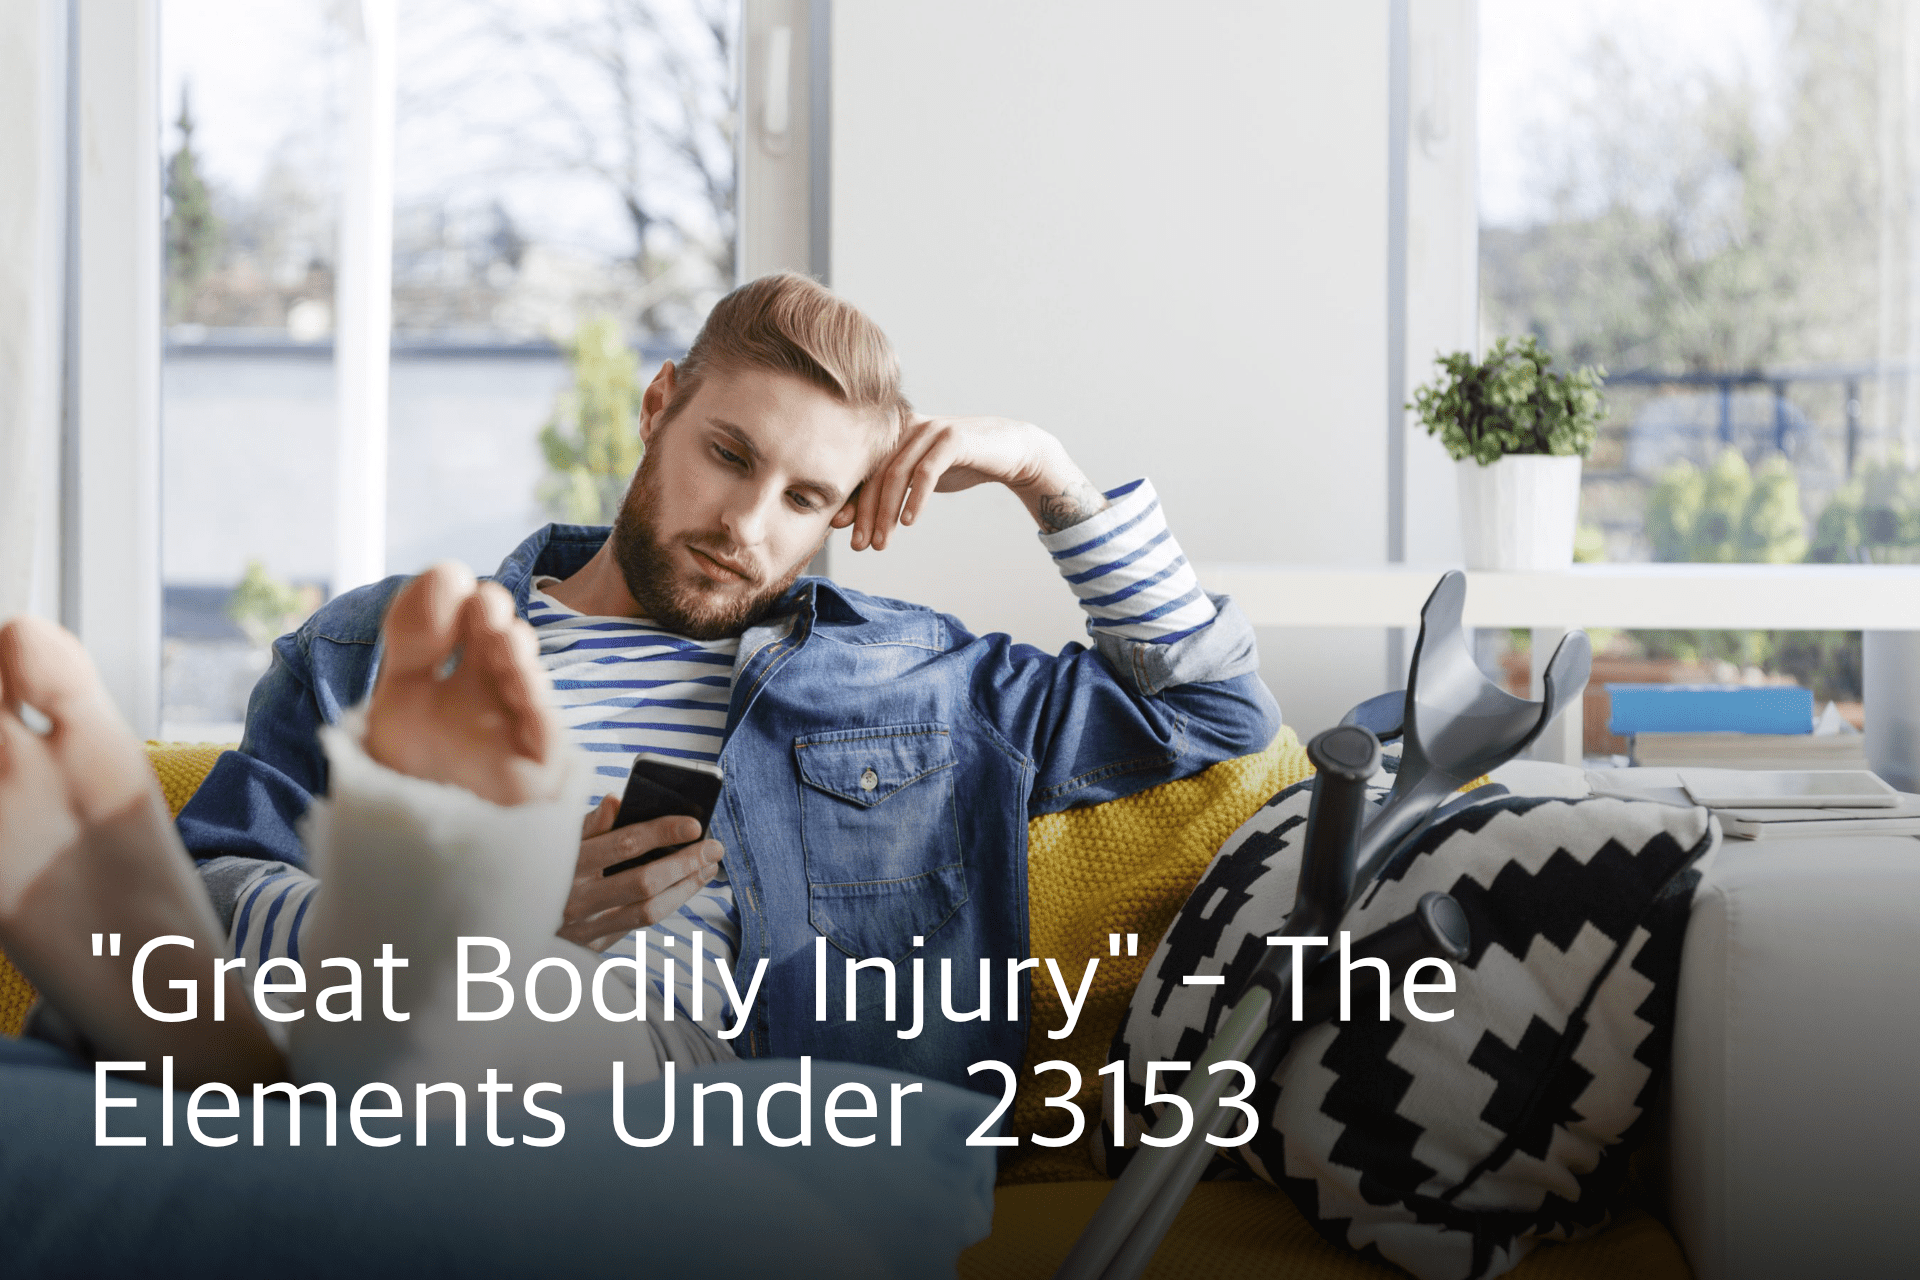 great bodily injury, 23153